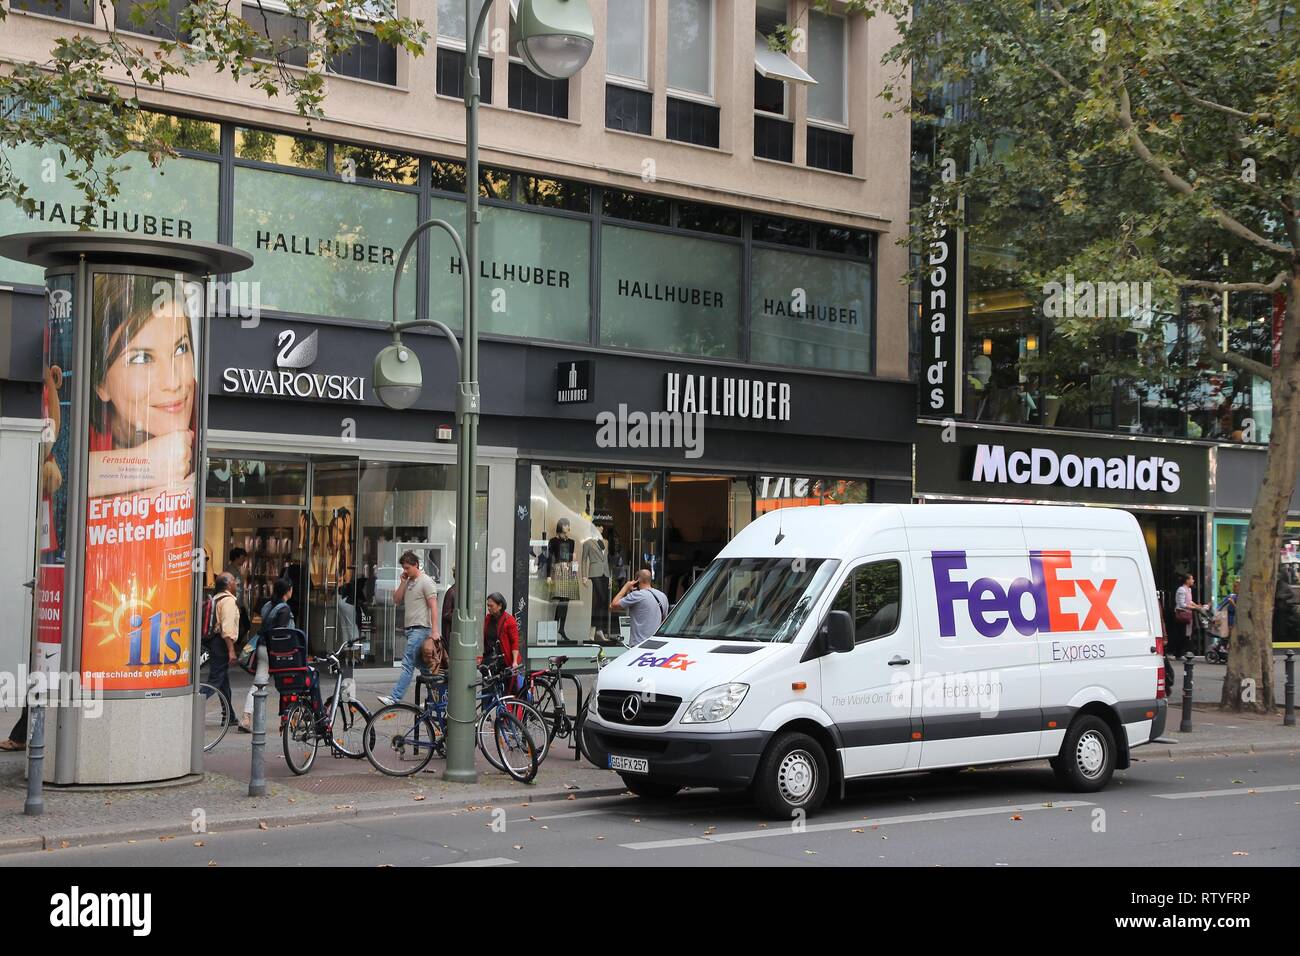 BERLIN, GERMANY - AUGUST 27, 2014: People walk by Fedex Express courier van in Berlin. Fedex is one of largest package delivery companies worldwide wi Stock Photo